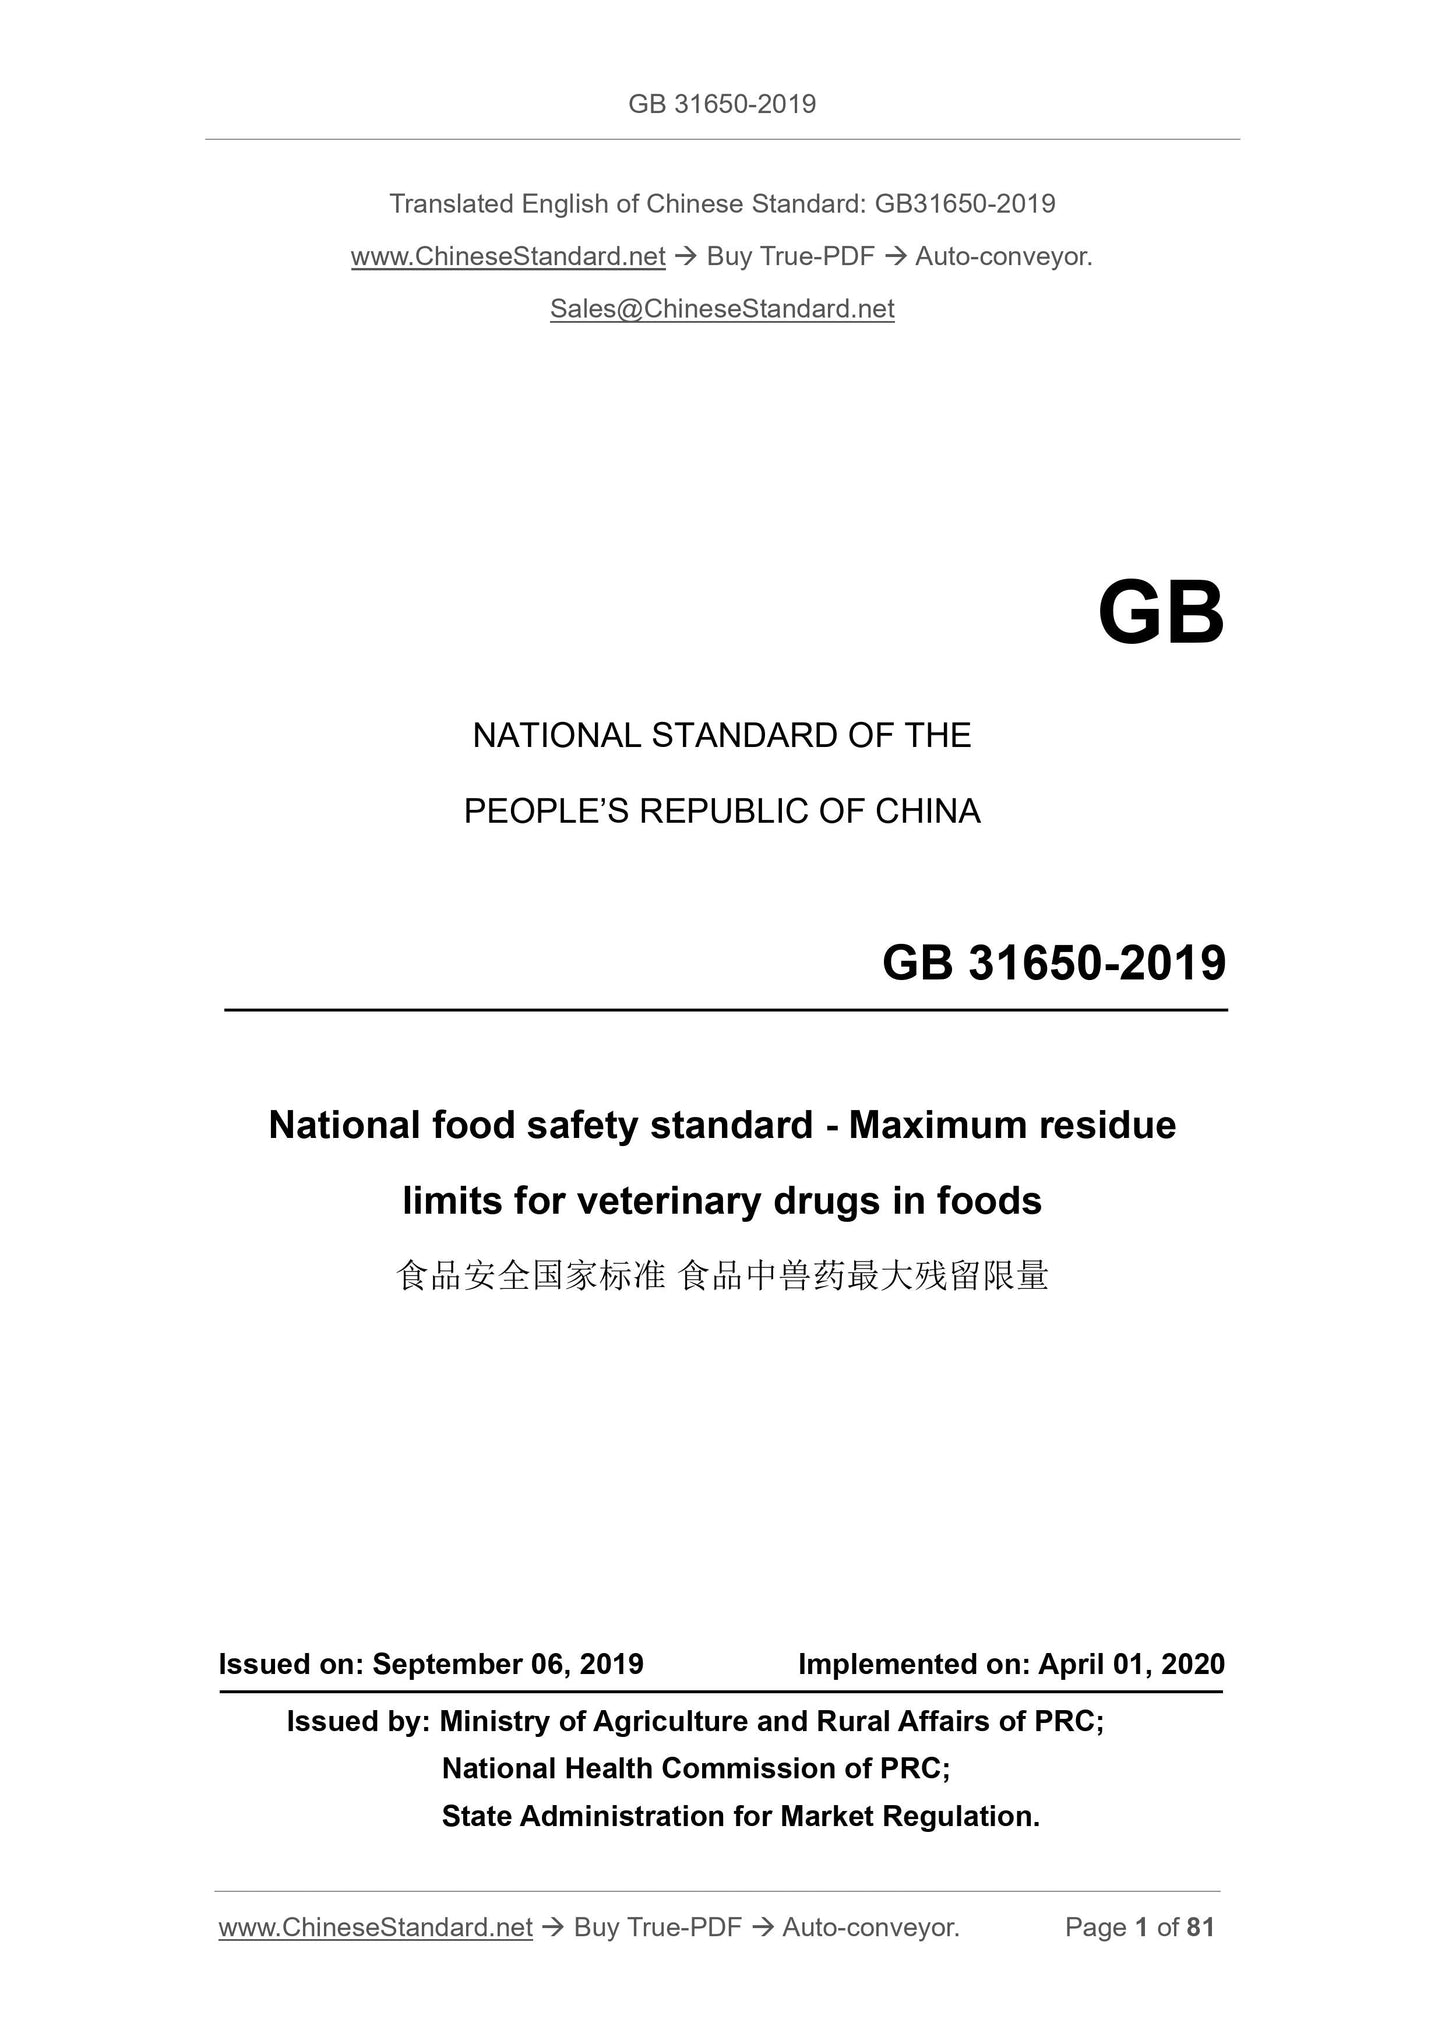 GB 31650-2019 Page 1